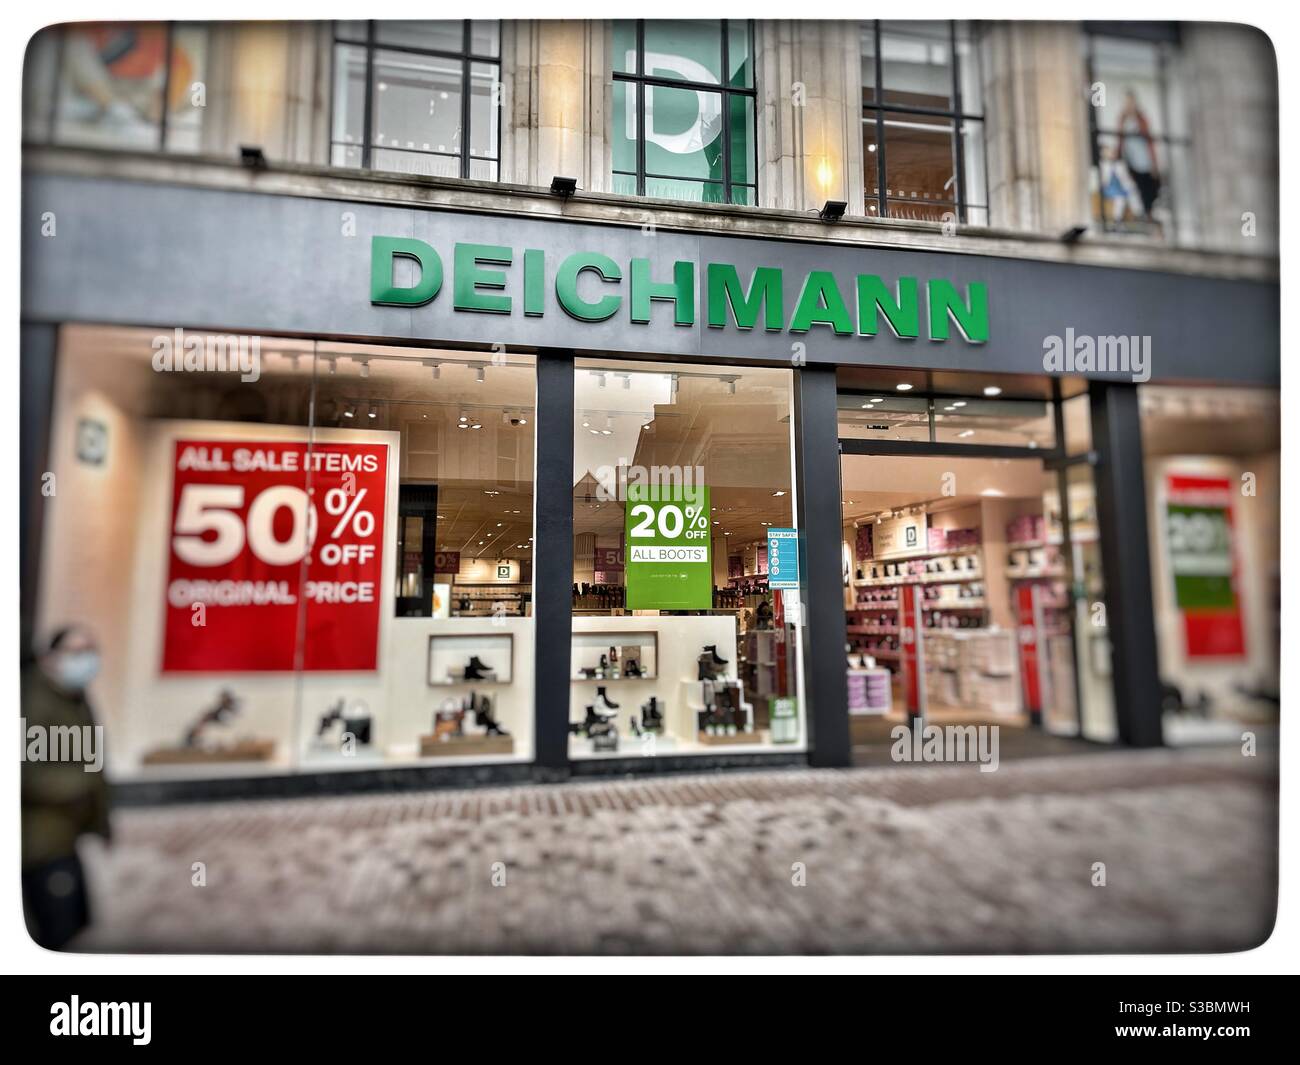 Deichmann Shoe Store High Resolution Stock Photography and Images - Alamy